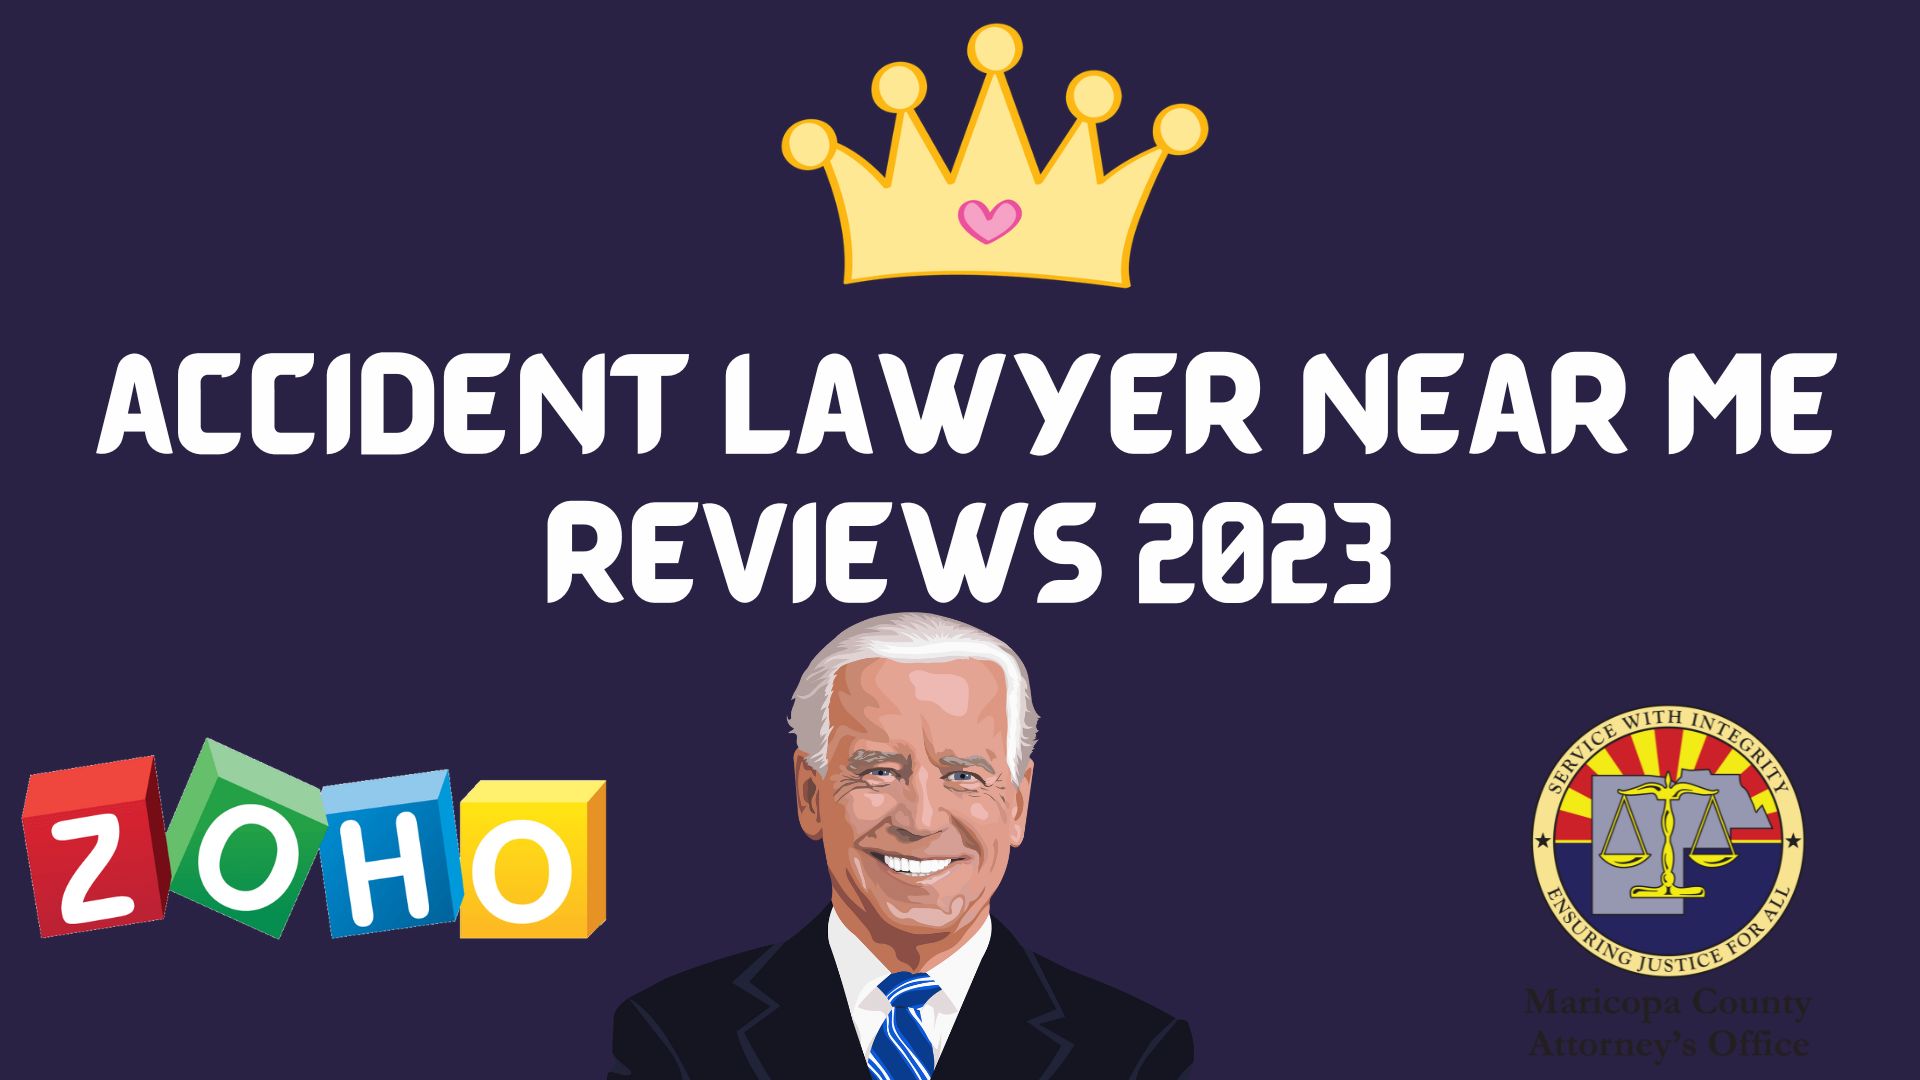 Accident lawyer near me reviews 2023